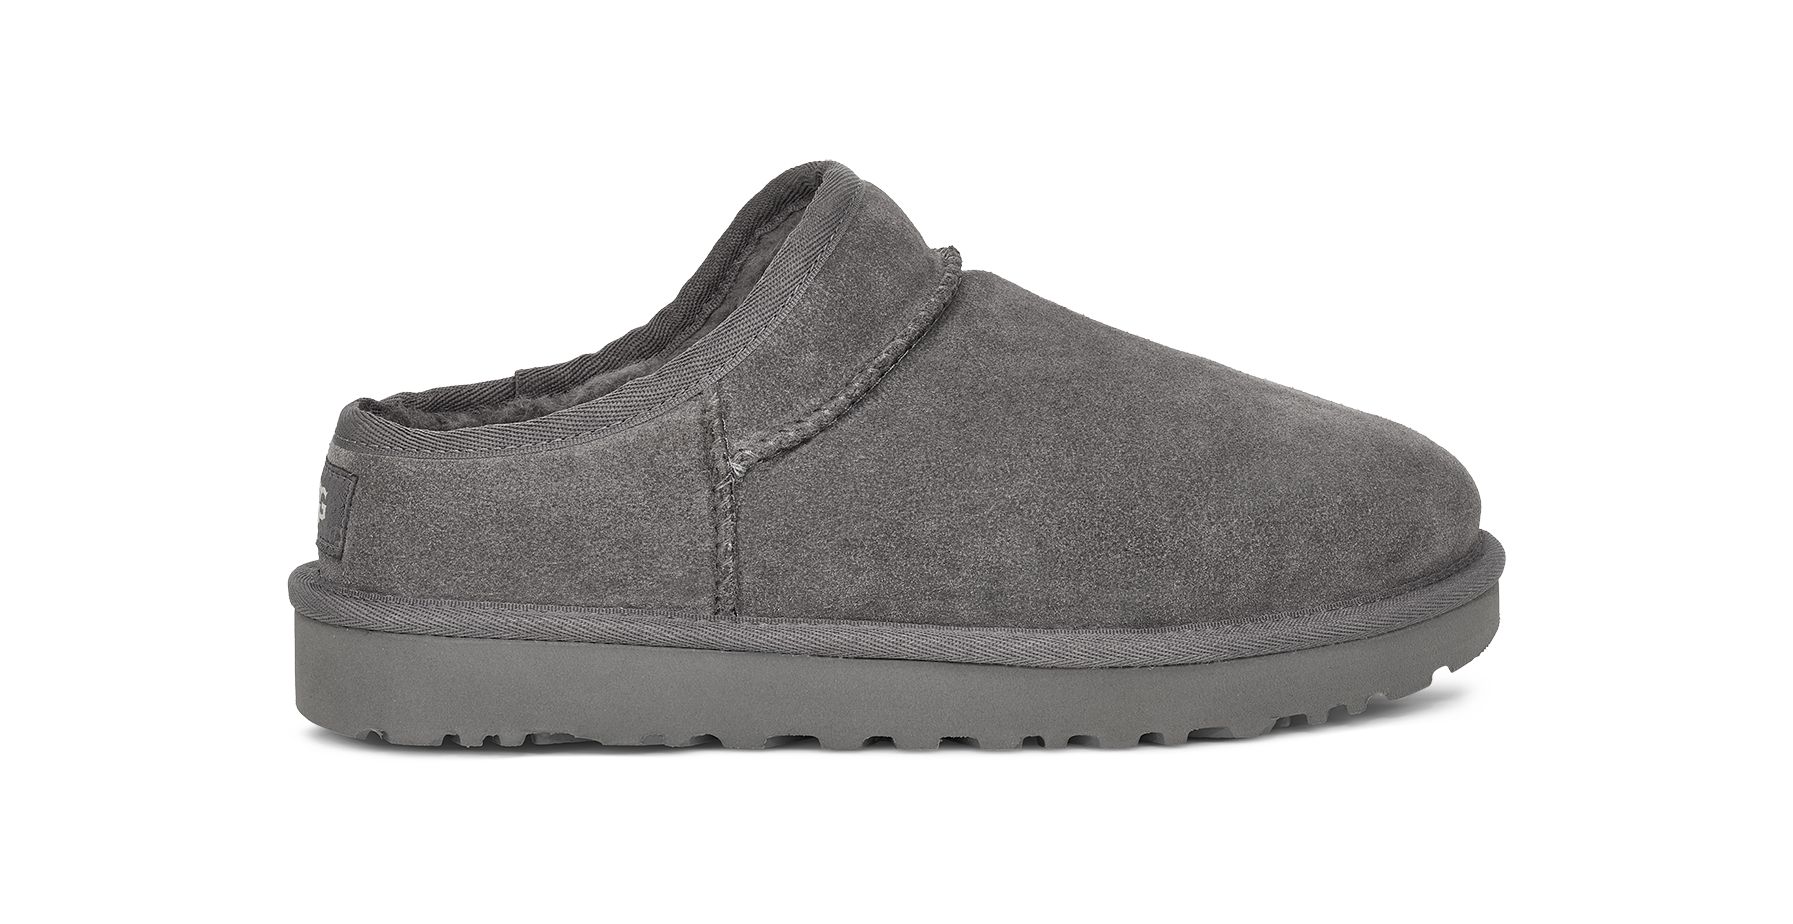 UGG Women's Classic Slipper Suede Slippers in Grey, Size 11 | UGG (US)